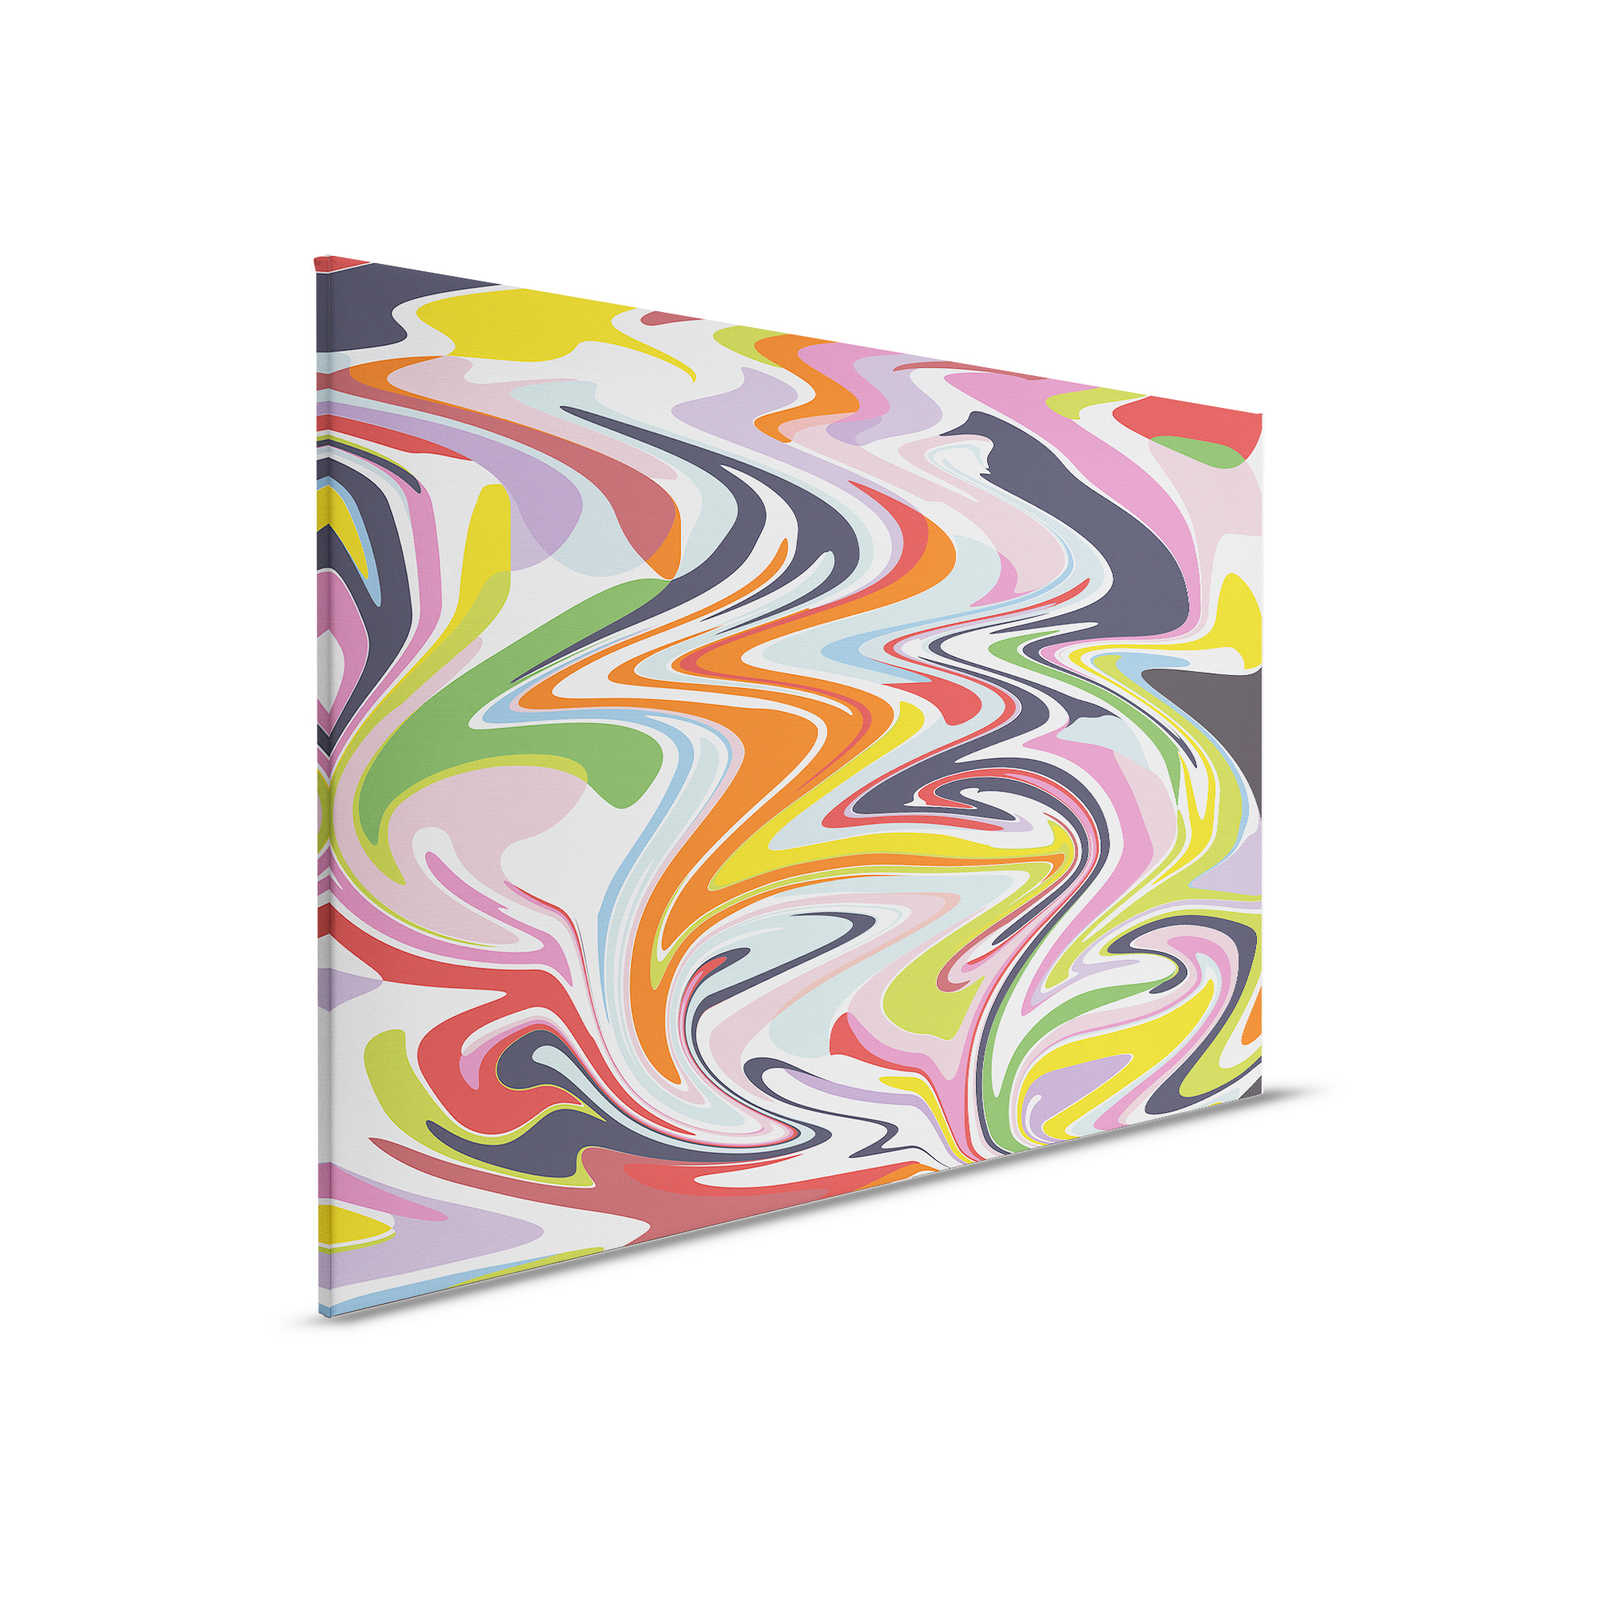         Canvas painting abstract colour mix colourful pattern - 0,90 m x 0,60 m
    